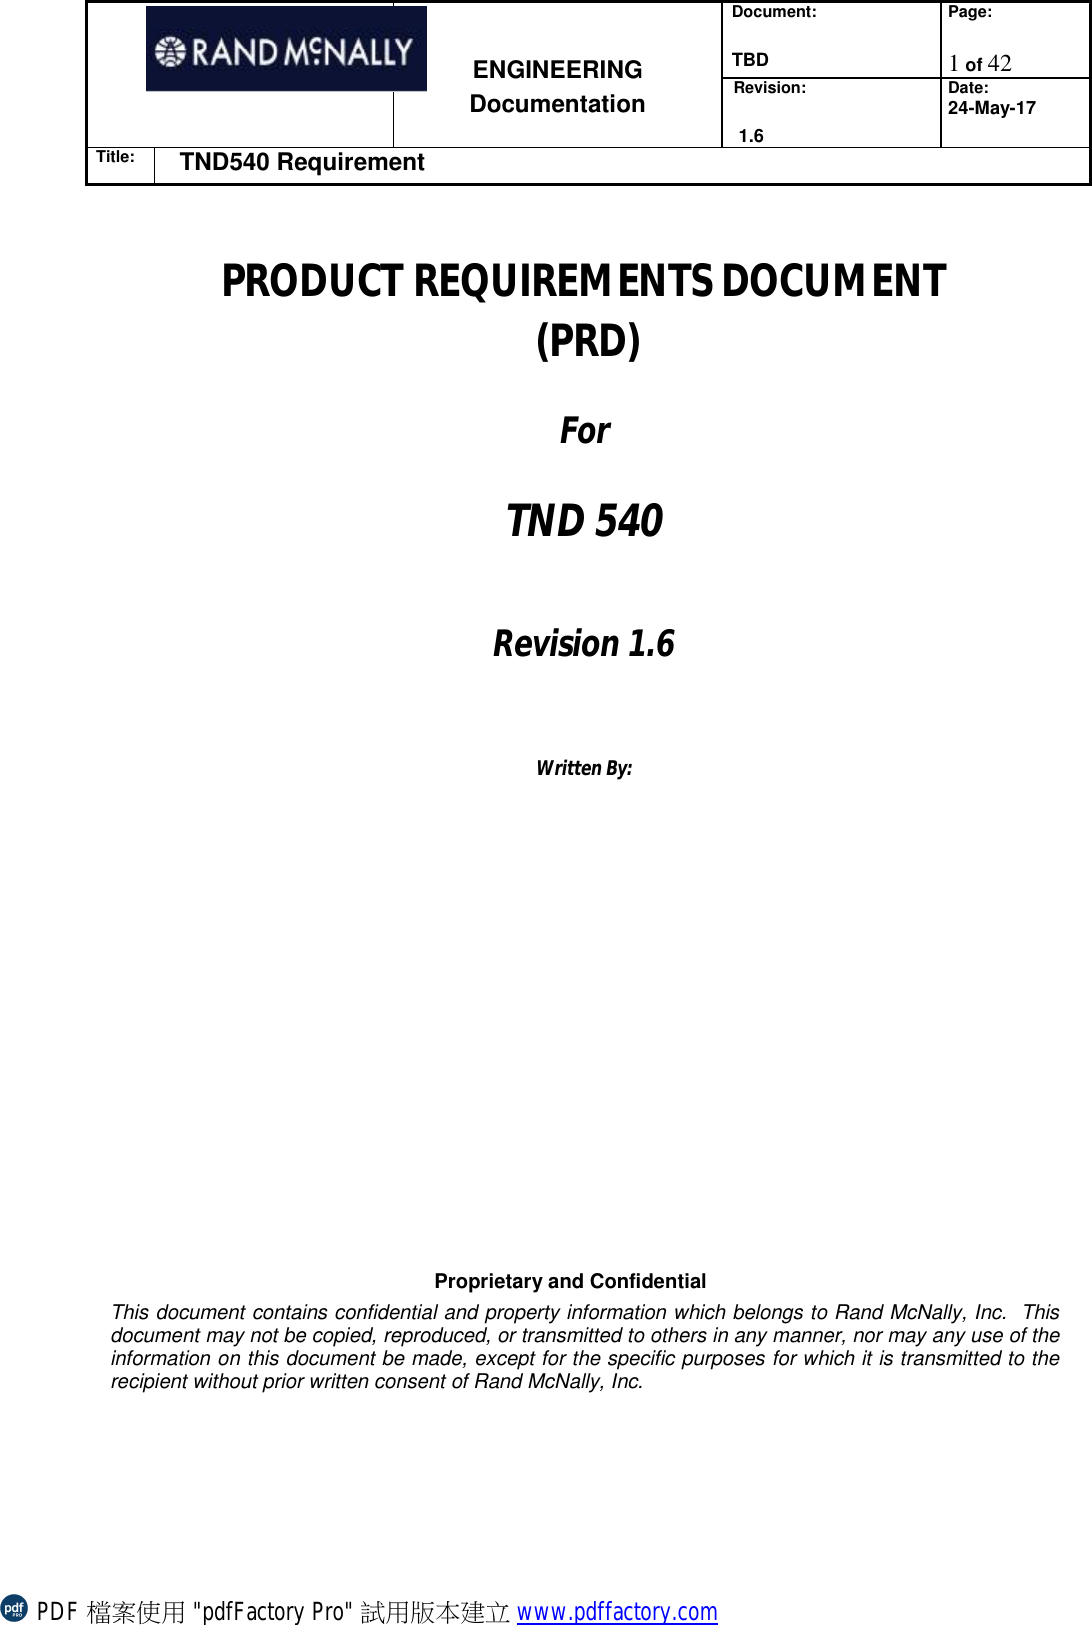 Document:  TBD Page:  1 of 42   ENGINEERING Documentation Revision:   1.6 Date: 24-May-17 Title: TND540 Requirement  Proprietary and Confidential This document contains confidential and property information which belongs to Rand McNally, Inc.  This document may not be copied, reproduced, or transmitted to others in any manner, nor may any use of the information on this document be made, except for the specific purposes for which it is transmitted to the recipient without prior written consent of Rand McNally, Inc.    PRODUCT REQUIREMENTS DOCUMENT  (PRD)  For   TND 540   Revision 1.6    Written By:     PDF 檔案使用 &quot;pdfFactory Pro&quot; 試用版本建立 www.pdffactory.com